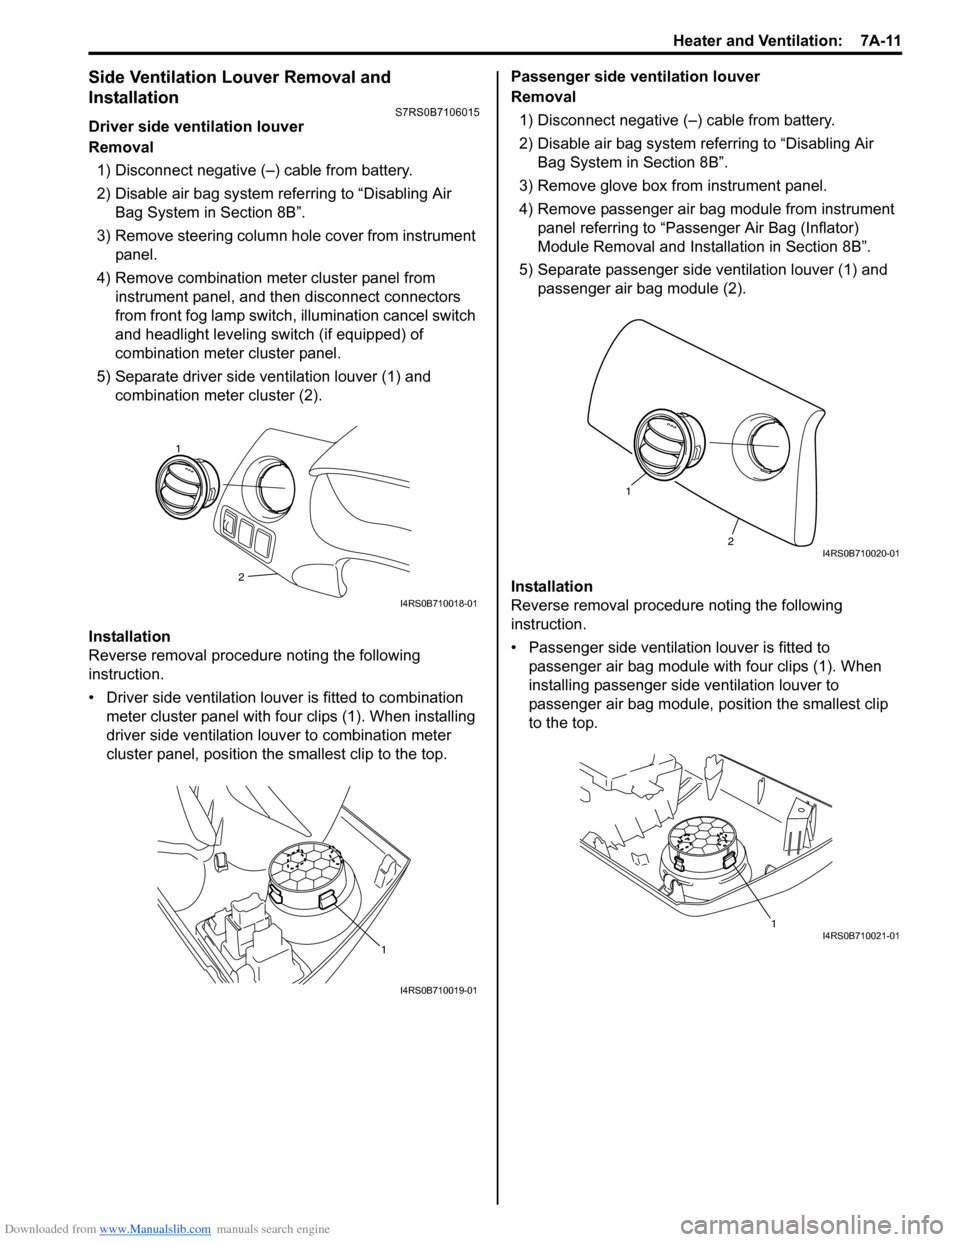 SUZUKI SWIFT 2005 2.G Service Workshop Manual Downloaded from www.Manualslib.com manuals search engine Heater and Ventilation:  7A-11
Side Ventilation Louver Removal and 
Installation
S7RS0B7106015
Driver side ventilation louver
Removal1) Disconn